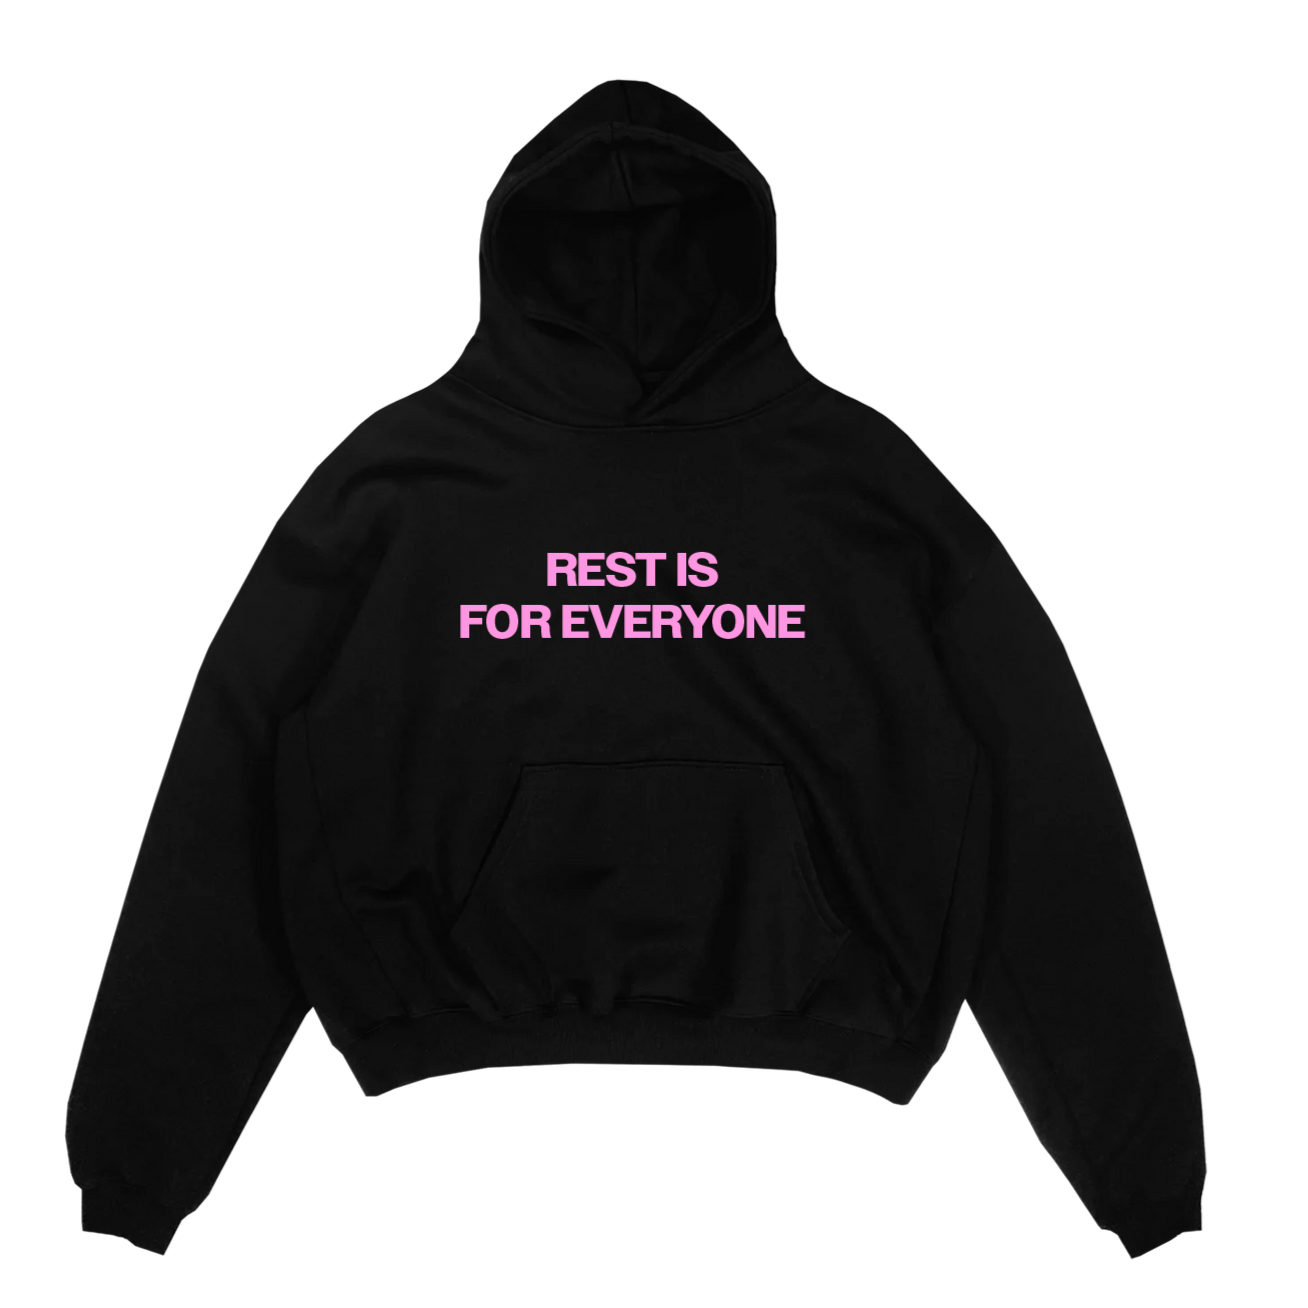 REST IS FOR EVERYONE HOODIE